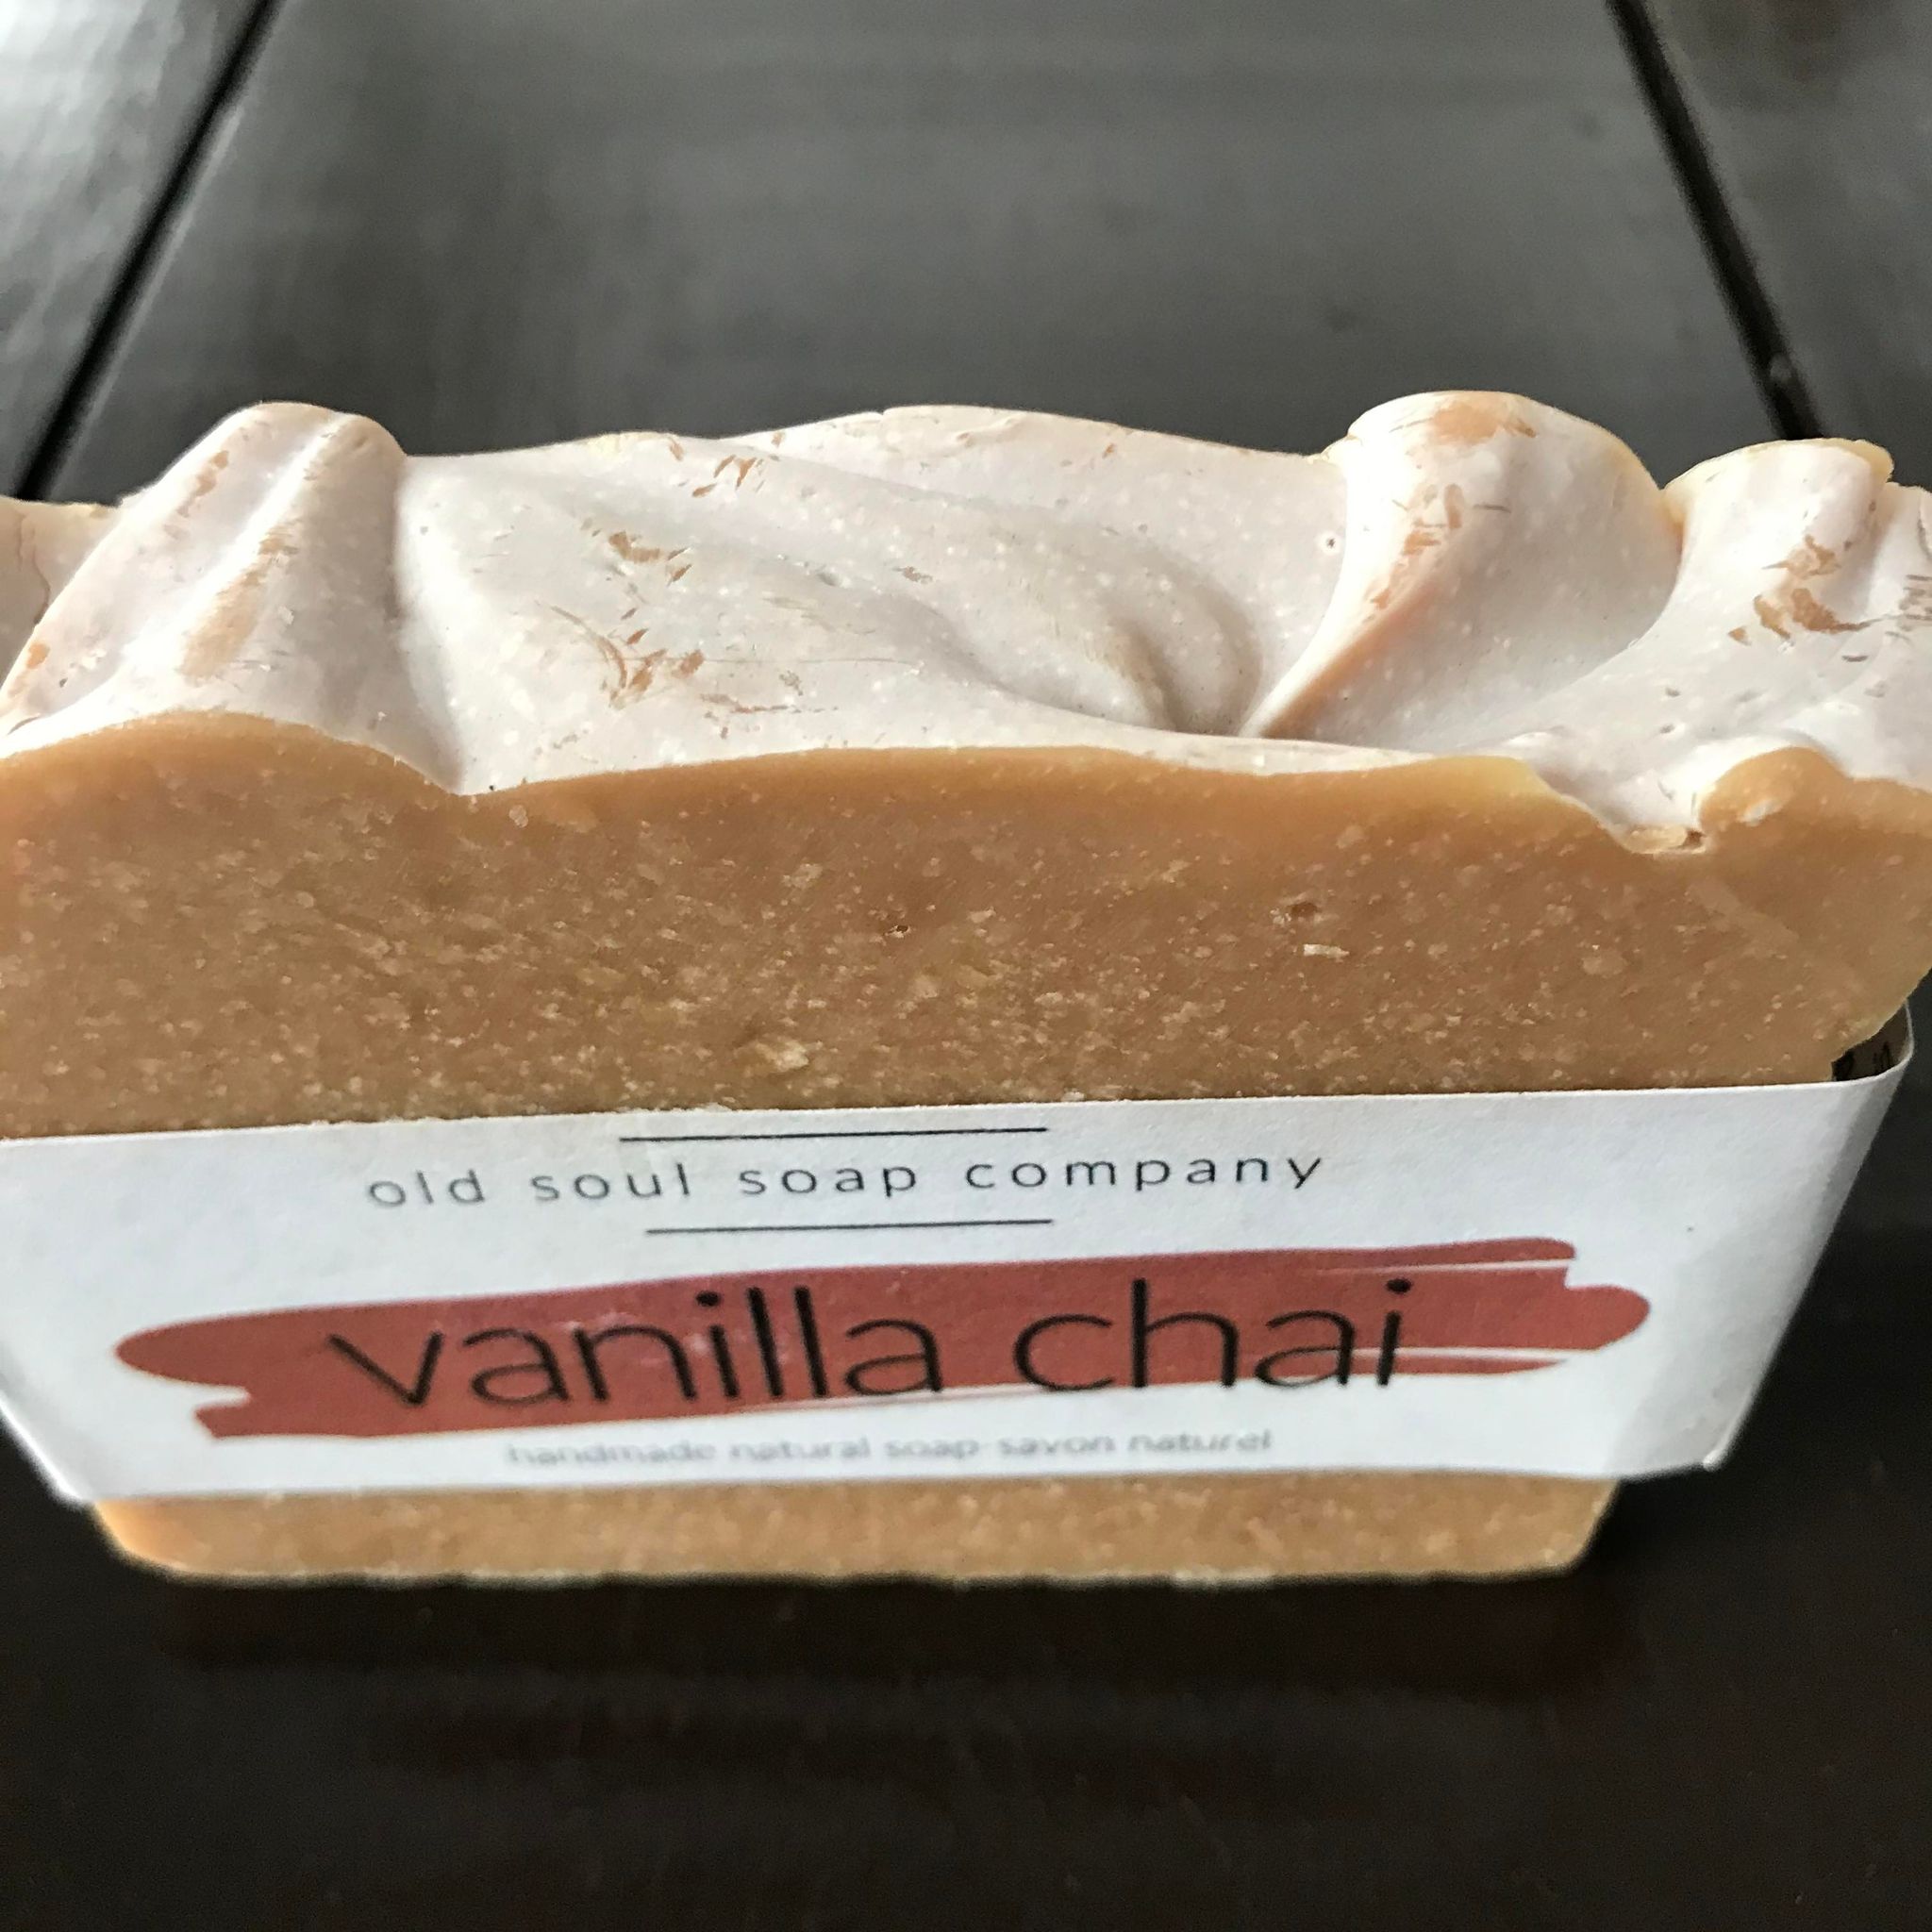 Vanilla chai artisan vegan soap made in canada by the Old Soul Soap Company